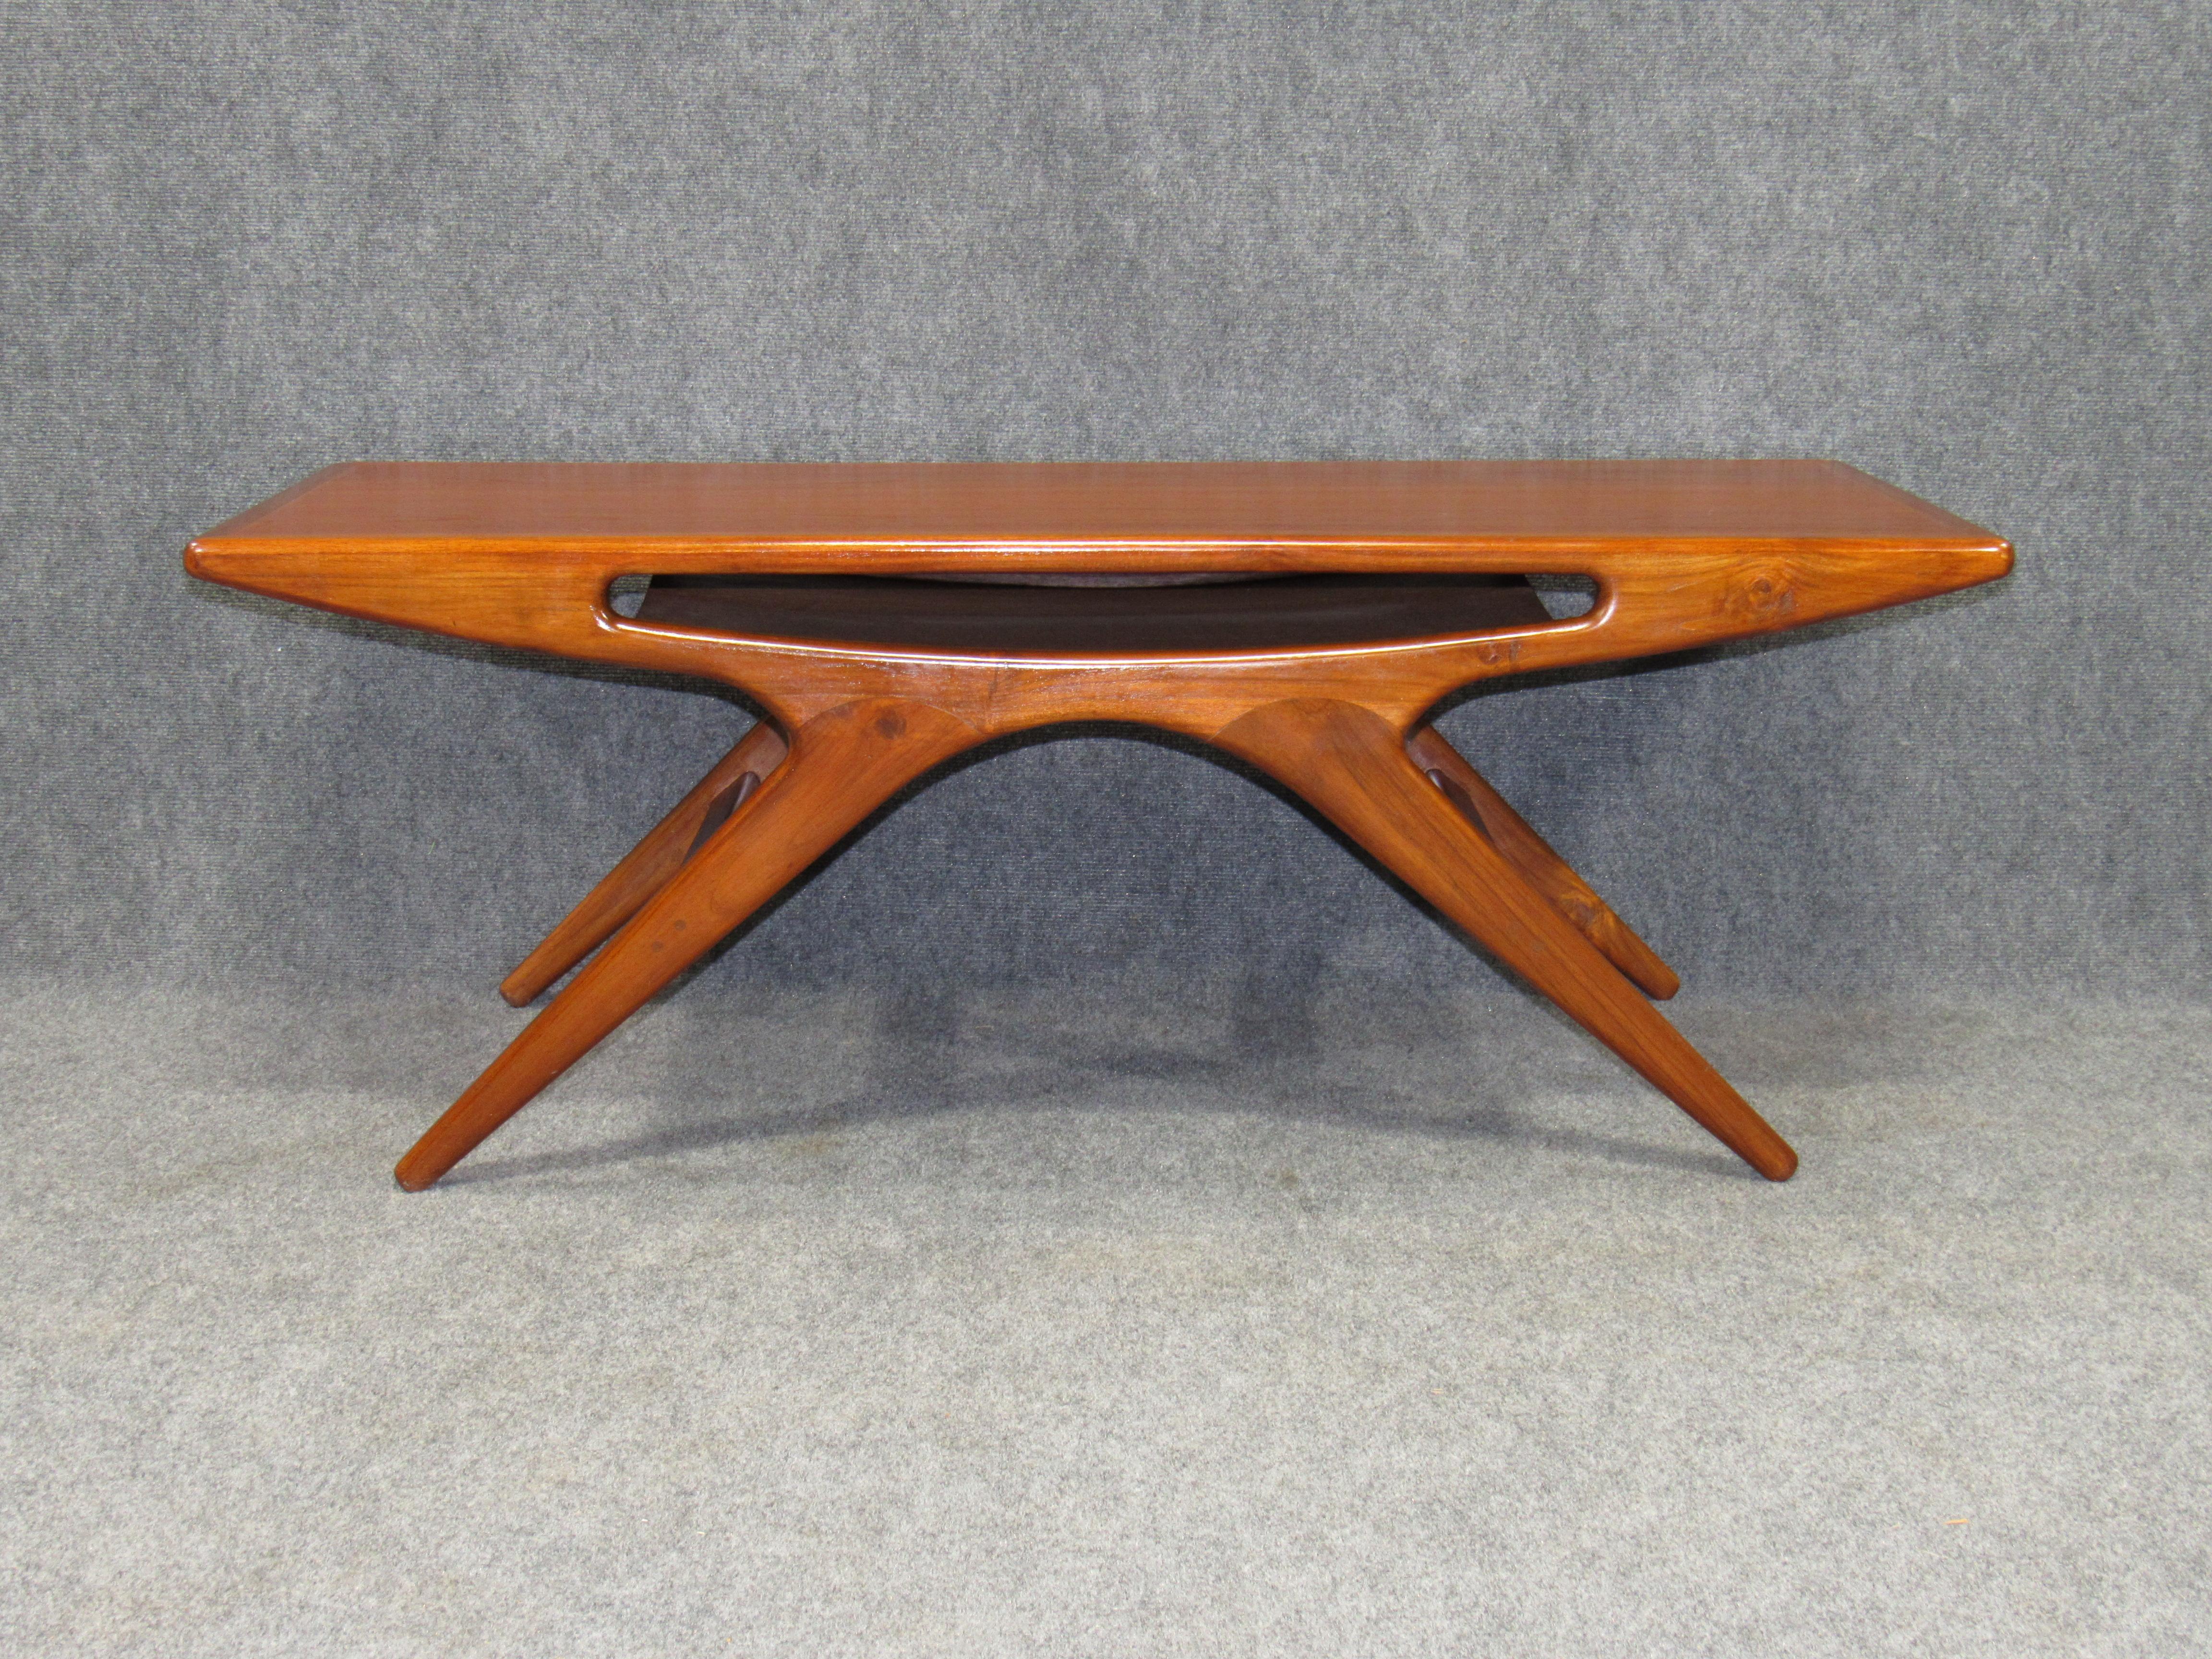 A triumph of Johannes Andersen's design prowess - the smile coffee table - is a rare and collectible piece. The design succeeds as being functional as well as playful and elegant. It has a sleek teak body with a center pocket shelf.